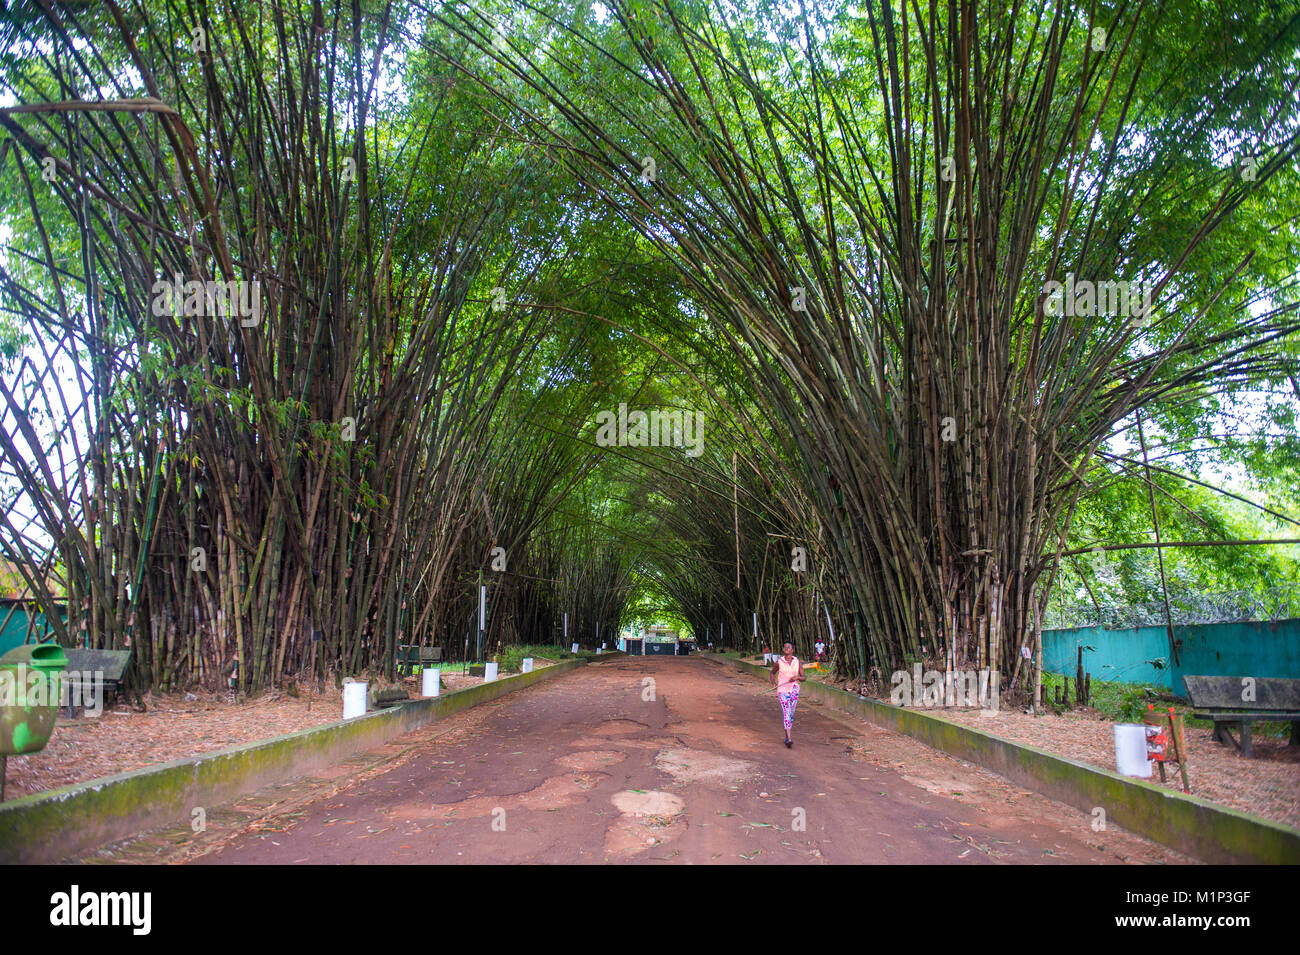 Bamboo forest in Abidjan, Ivory Coast, West Africa, Africa Stock Photo